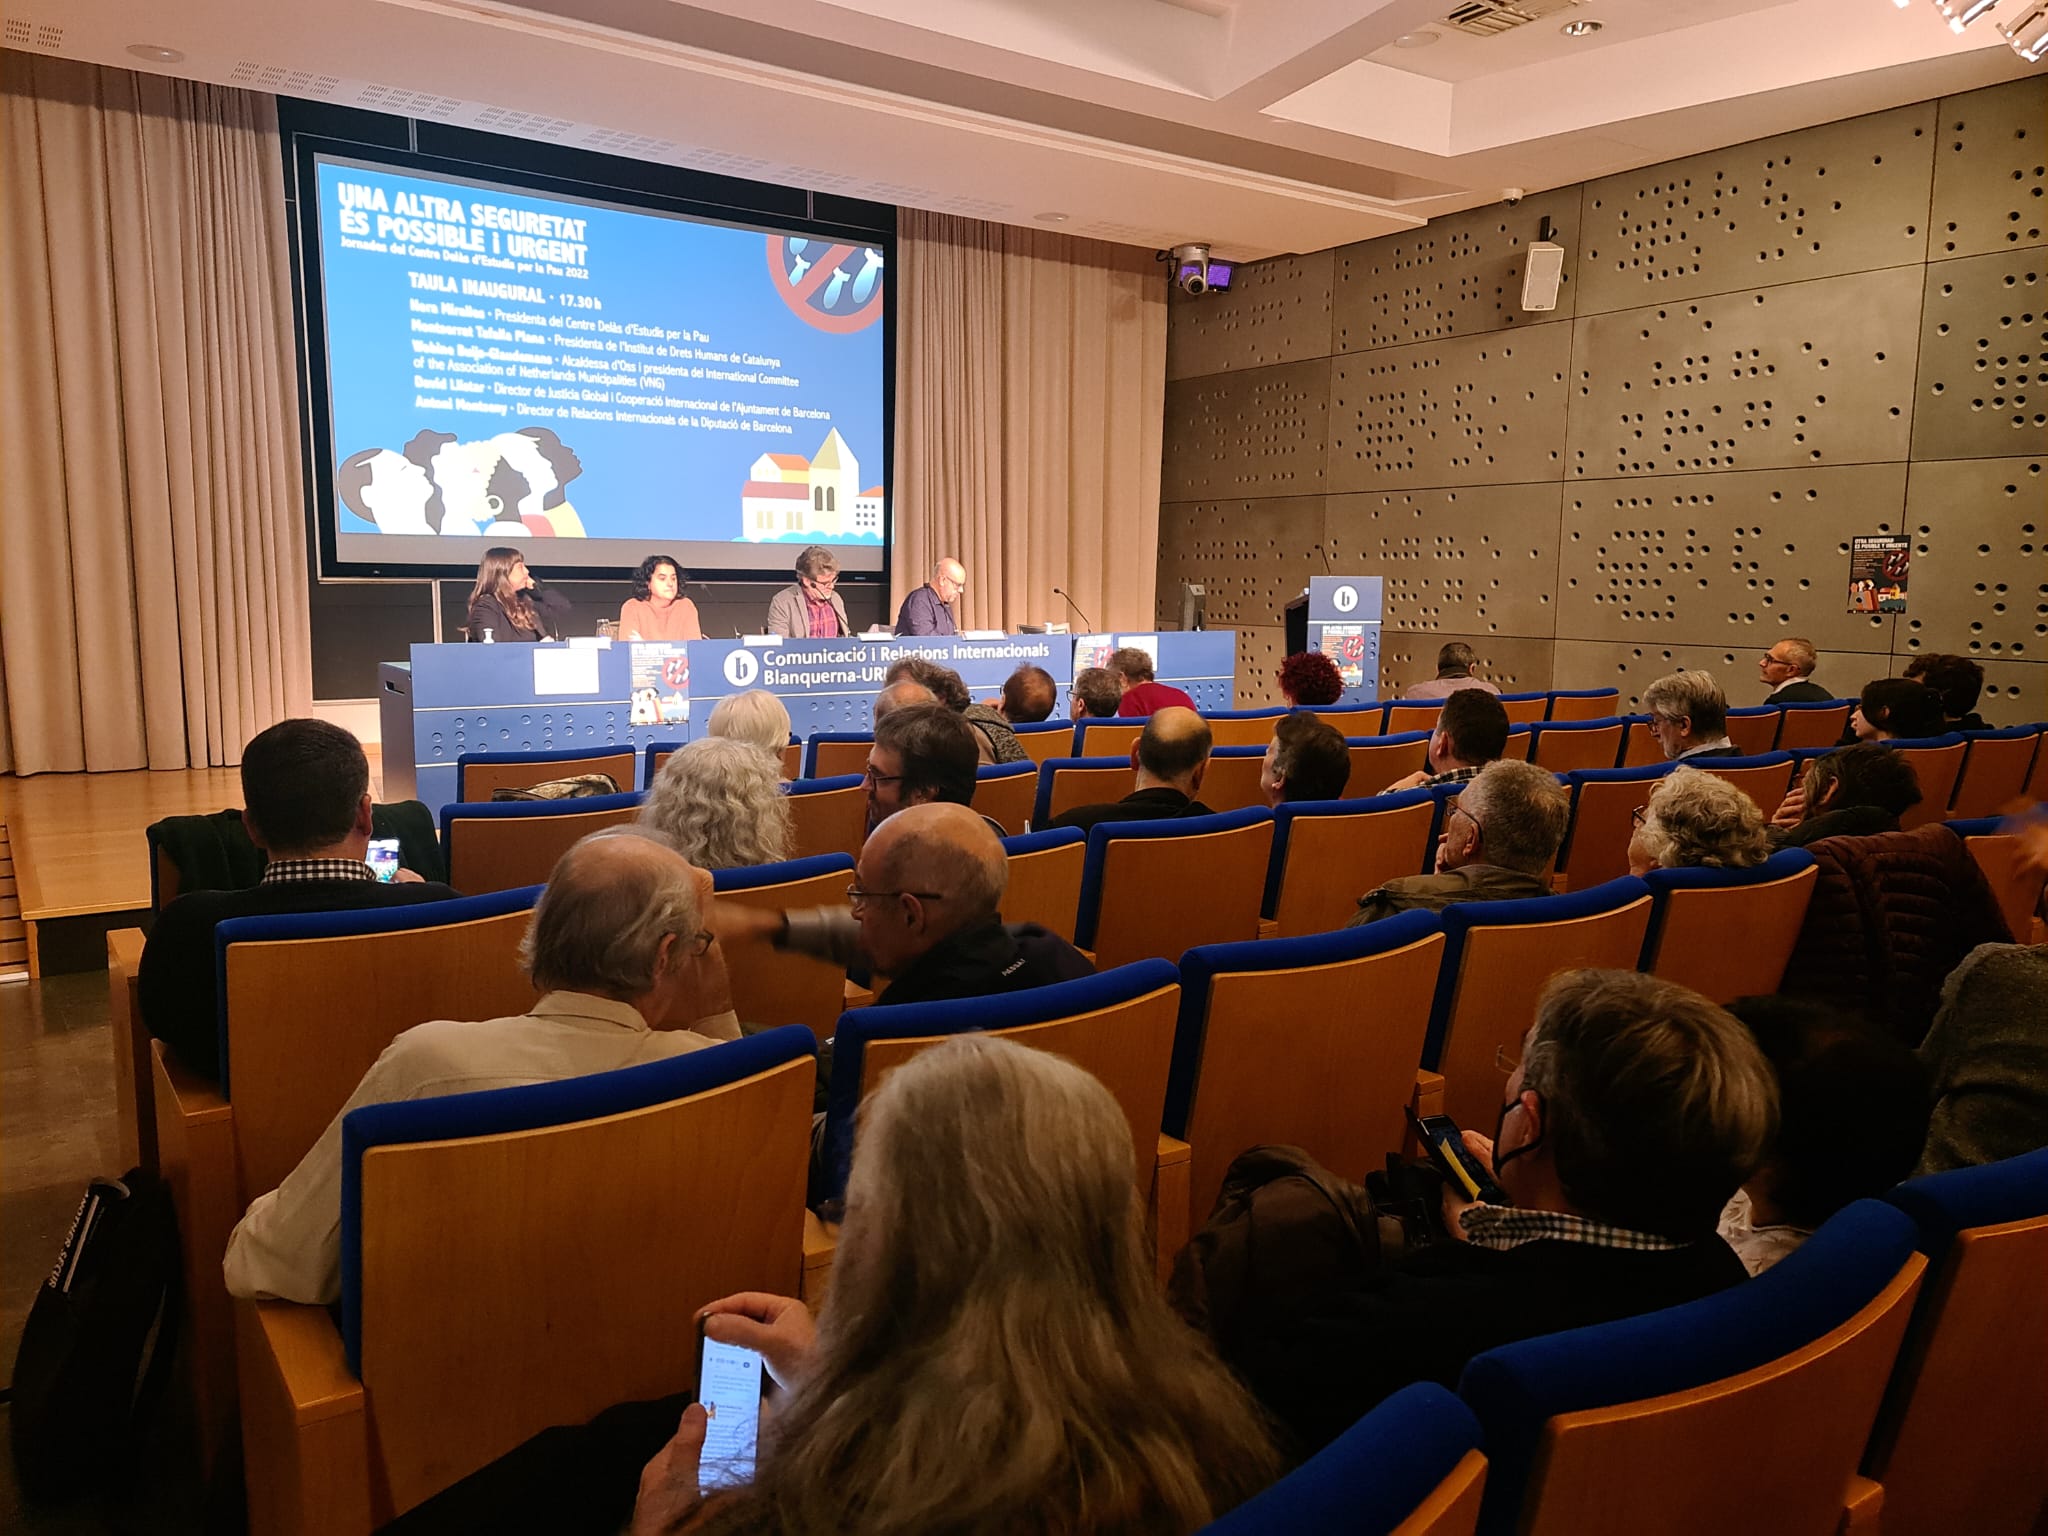 The Annual Conference of Centre Delàs brings together a hundred people to reflect and debate on alternatives to hegemonic security.